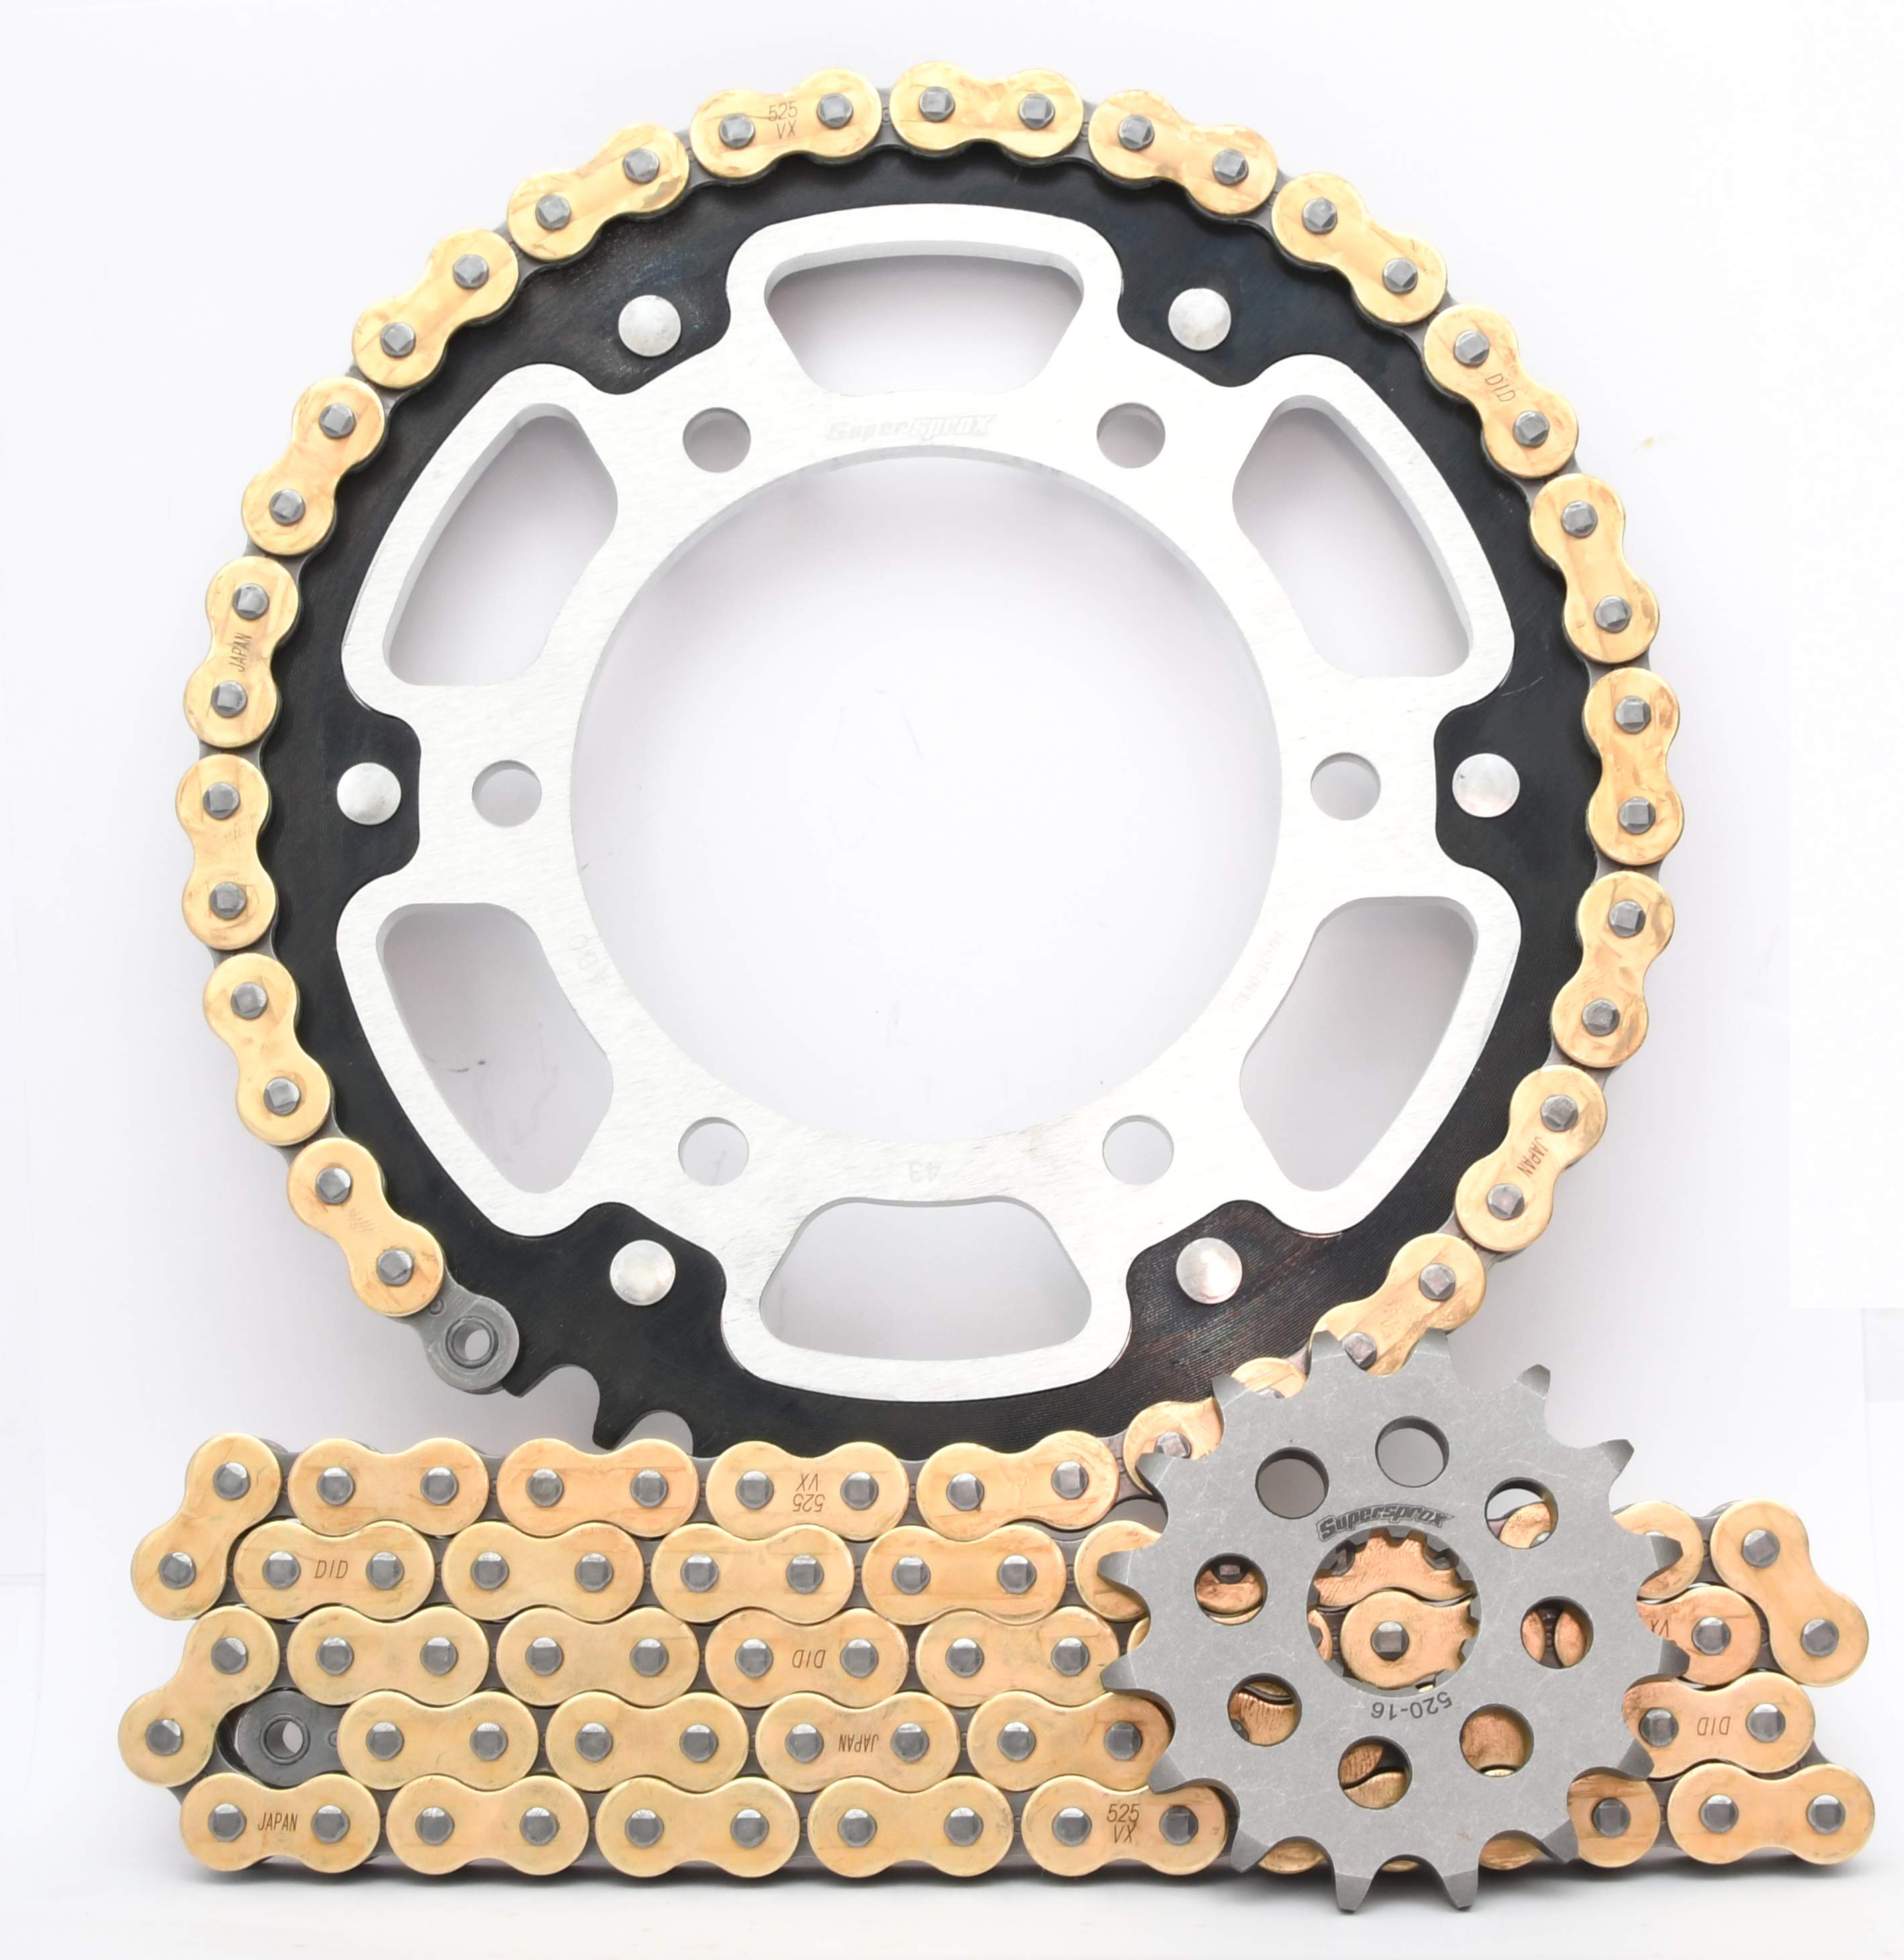 Supersprox/DID Chain & Sprocket Kit Yamaha YZF R1 1998-2014 - Choose Your Gearing